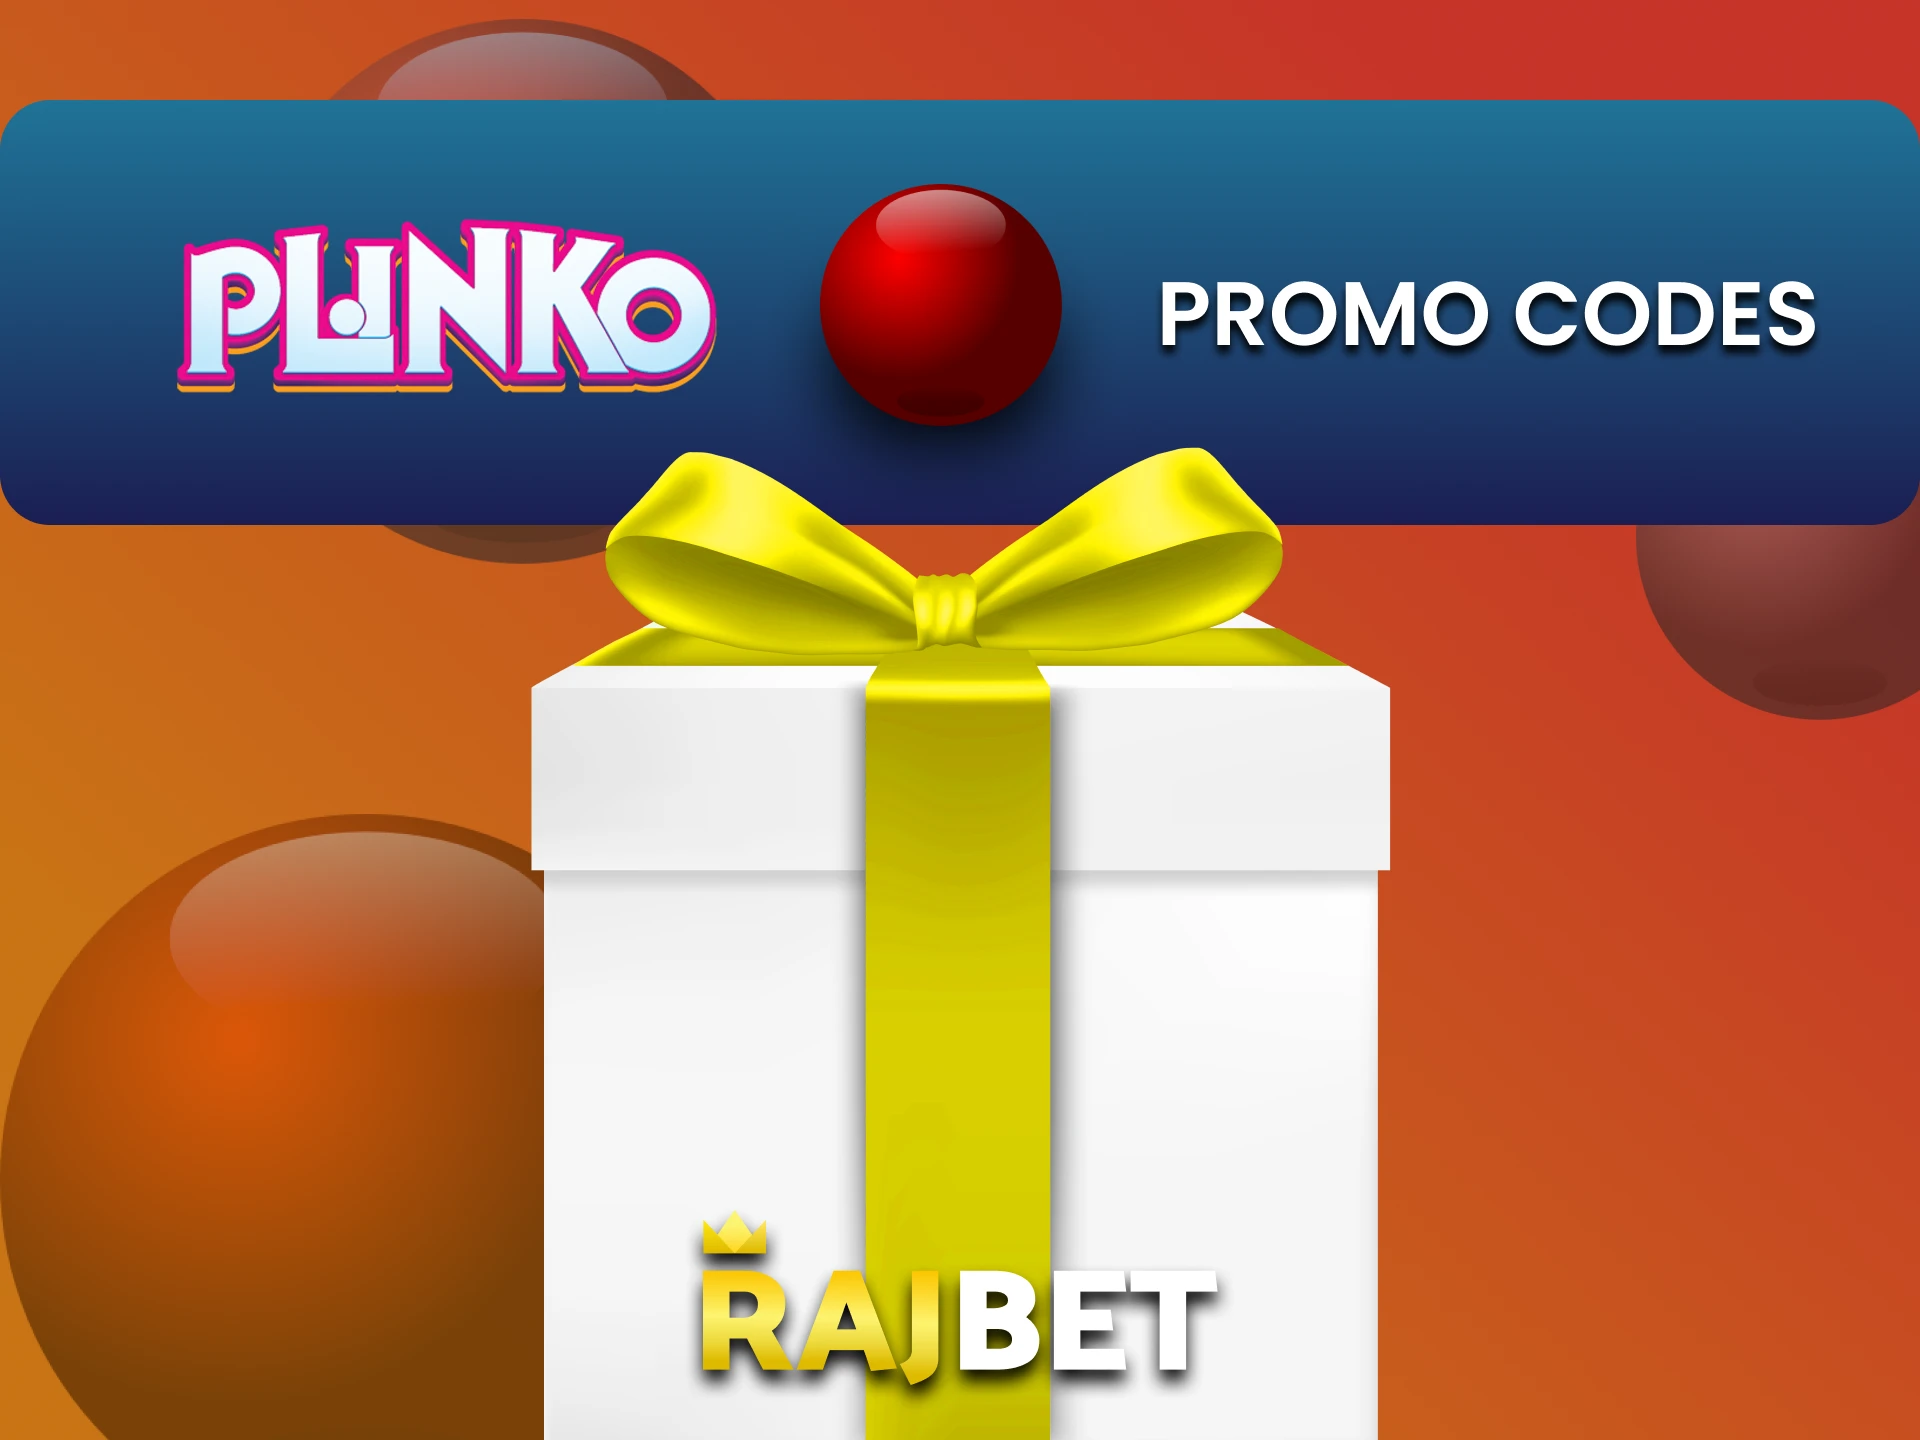 You can get a special bonus from Rajbet using a promo code.